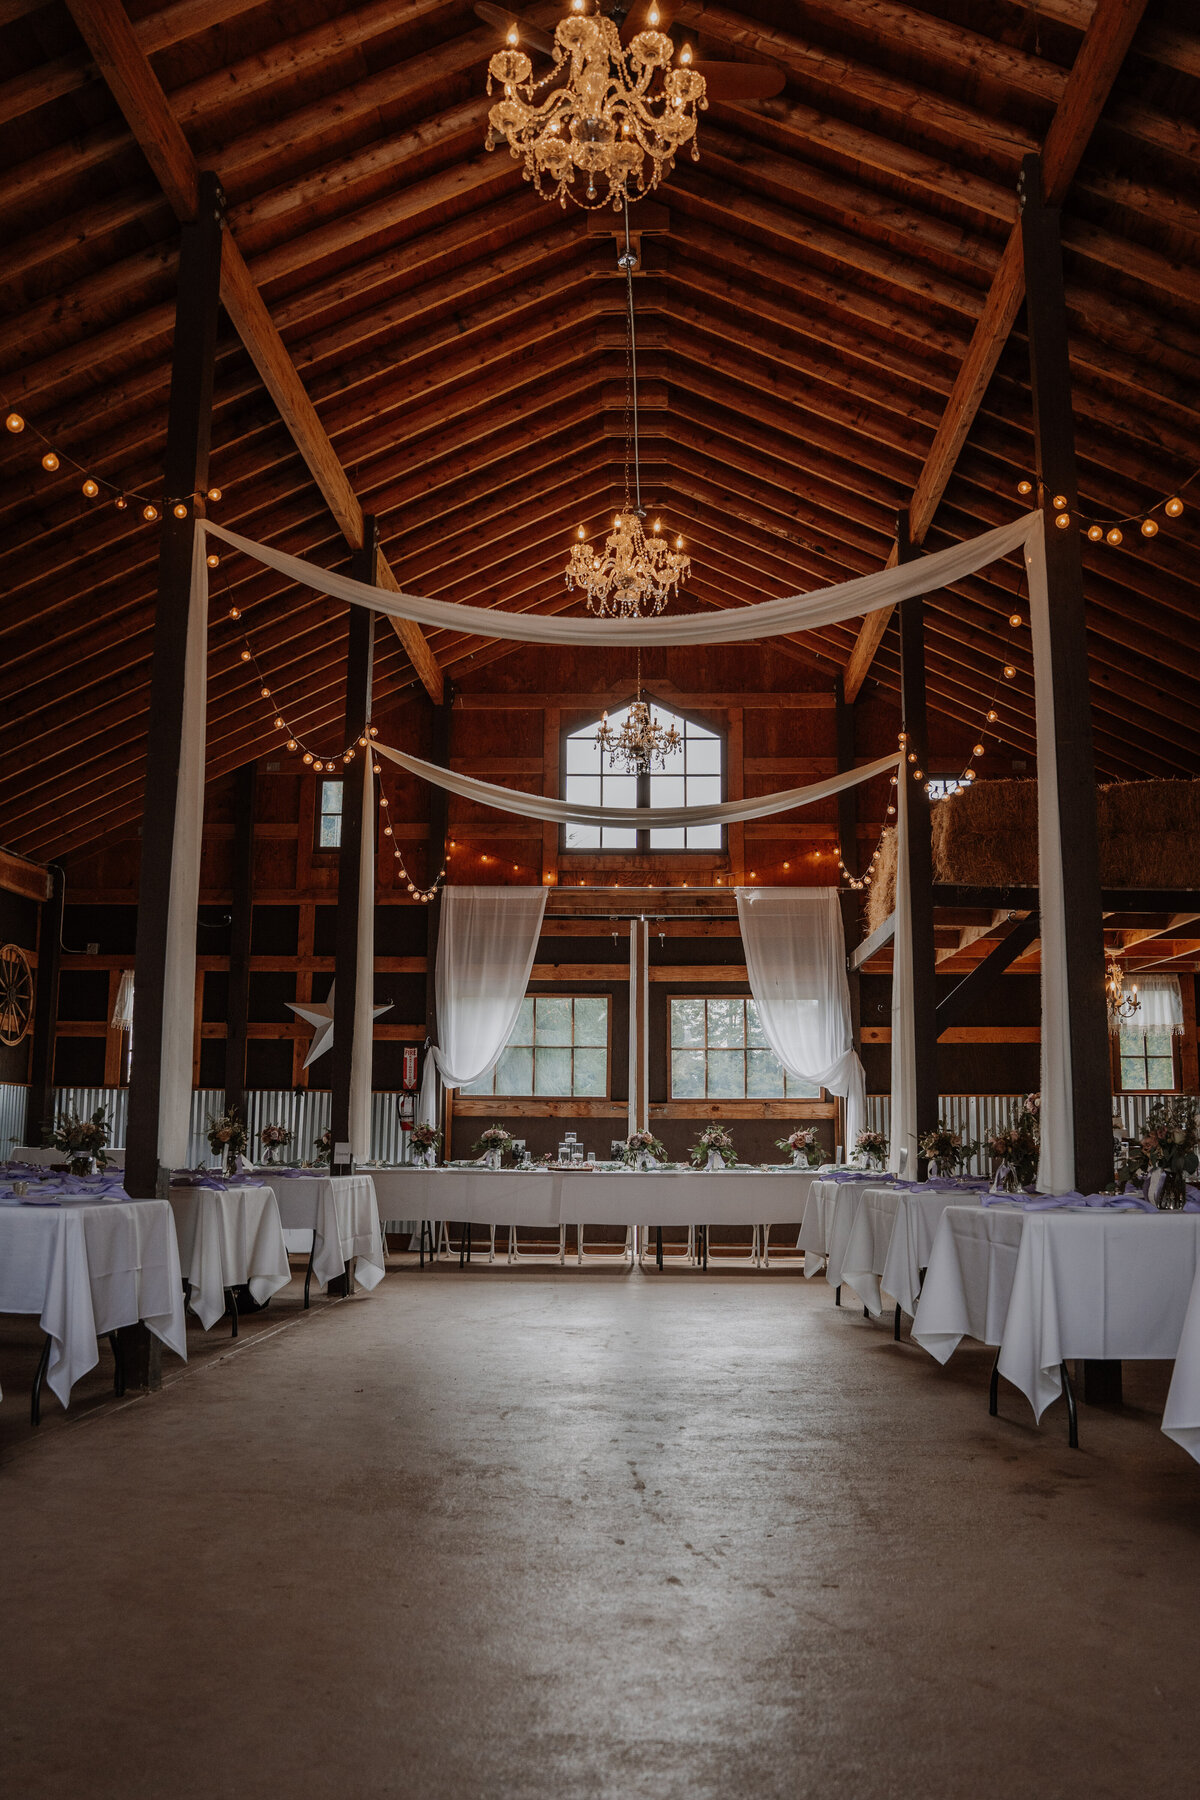 Inside of barn with chandeliers and tables